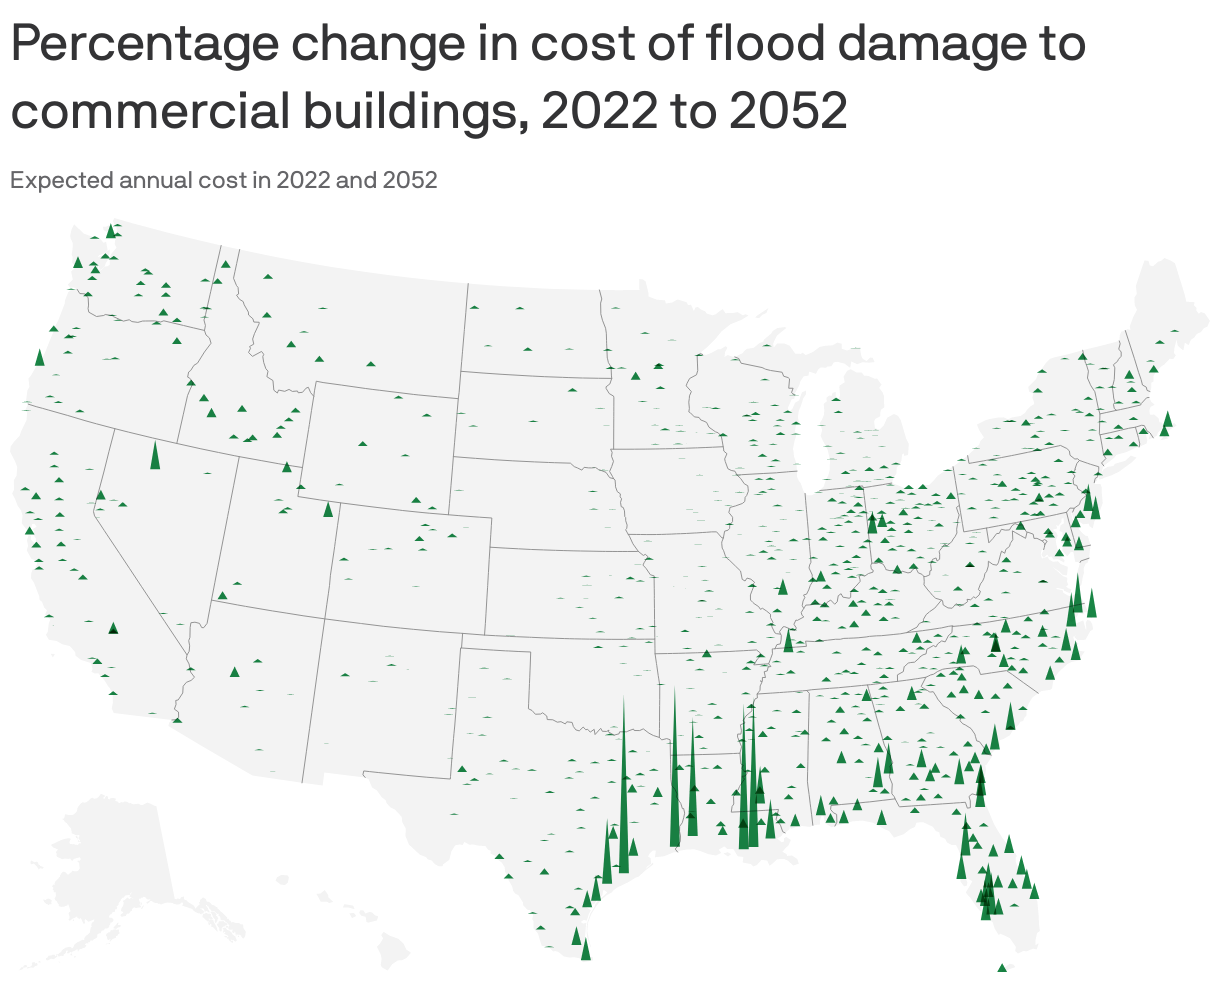 Percentage change in cost of flood damage to commercial buildings, 2022 to 2052